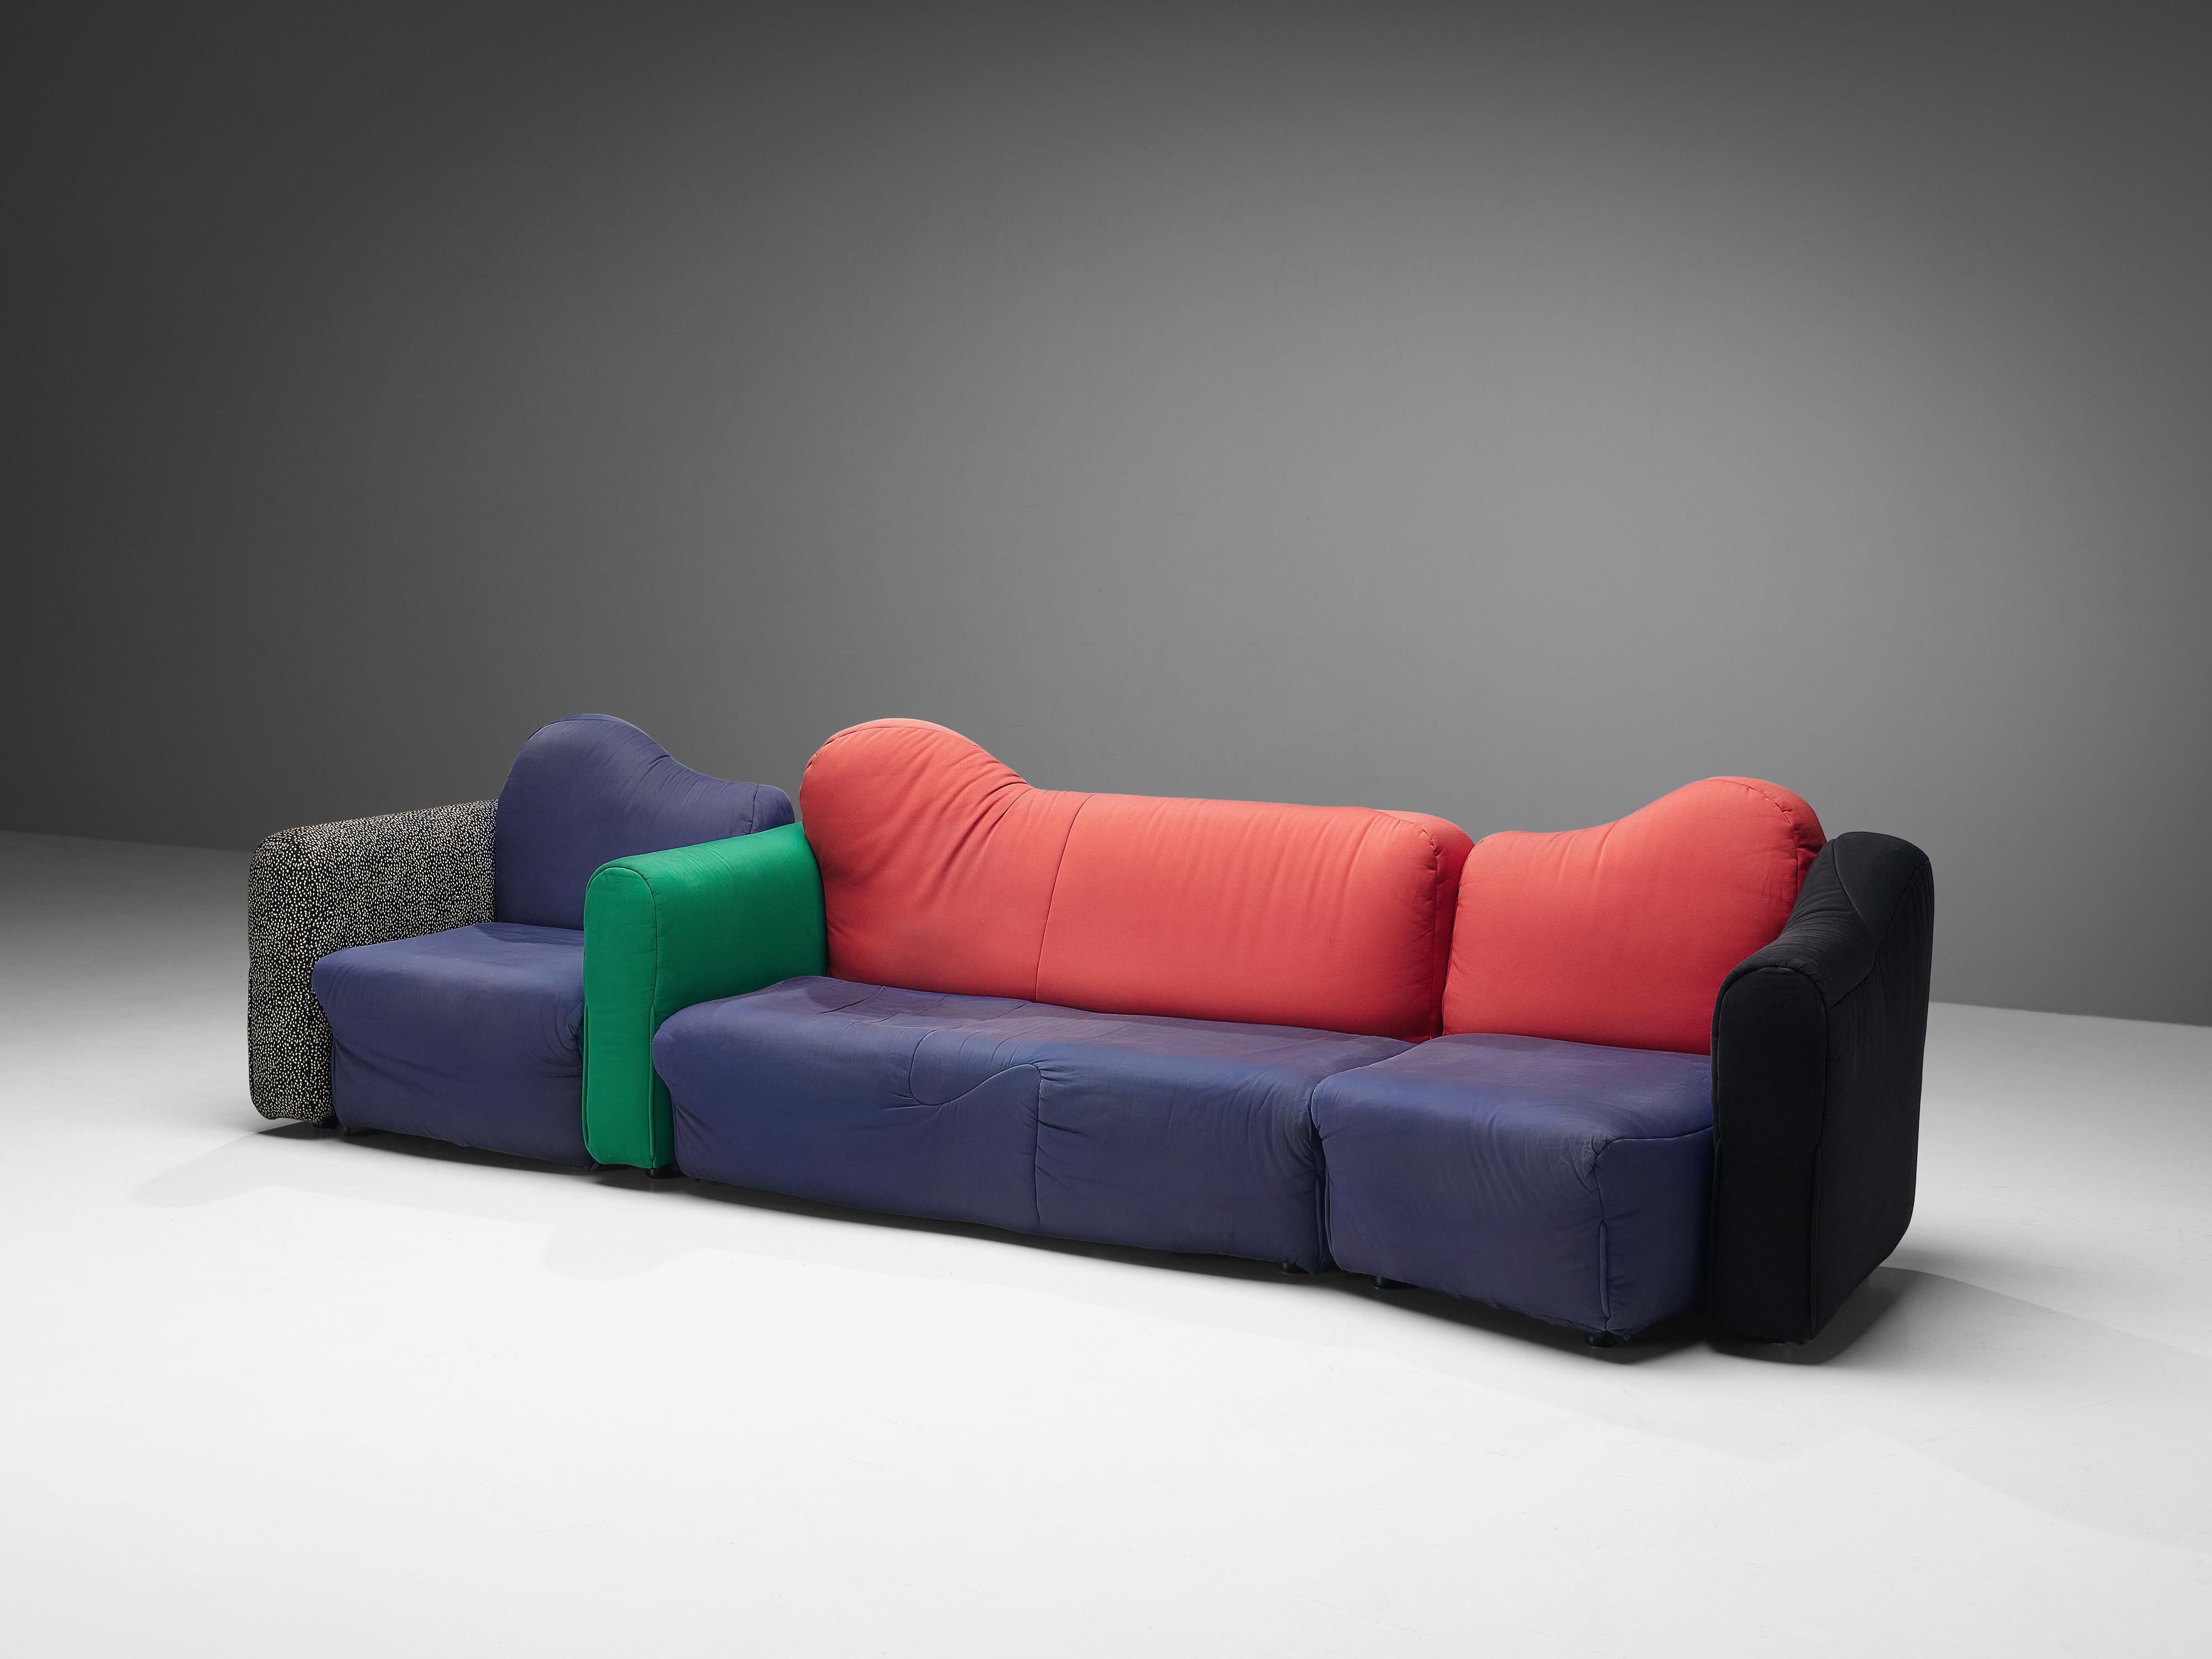 Gaetano Pesce for Cassina, sofa, model ‘Cannaregio’, multicolored upholstery, Italy, 1987

Large ‘Cannaregio’ sofa, designed by Gaetano Pesce for Cassina. The 1987 design is playful, versatile and colorful. The set can be arranged in different